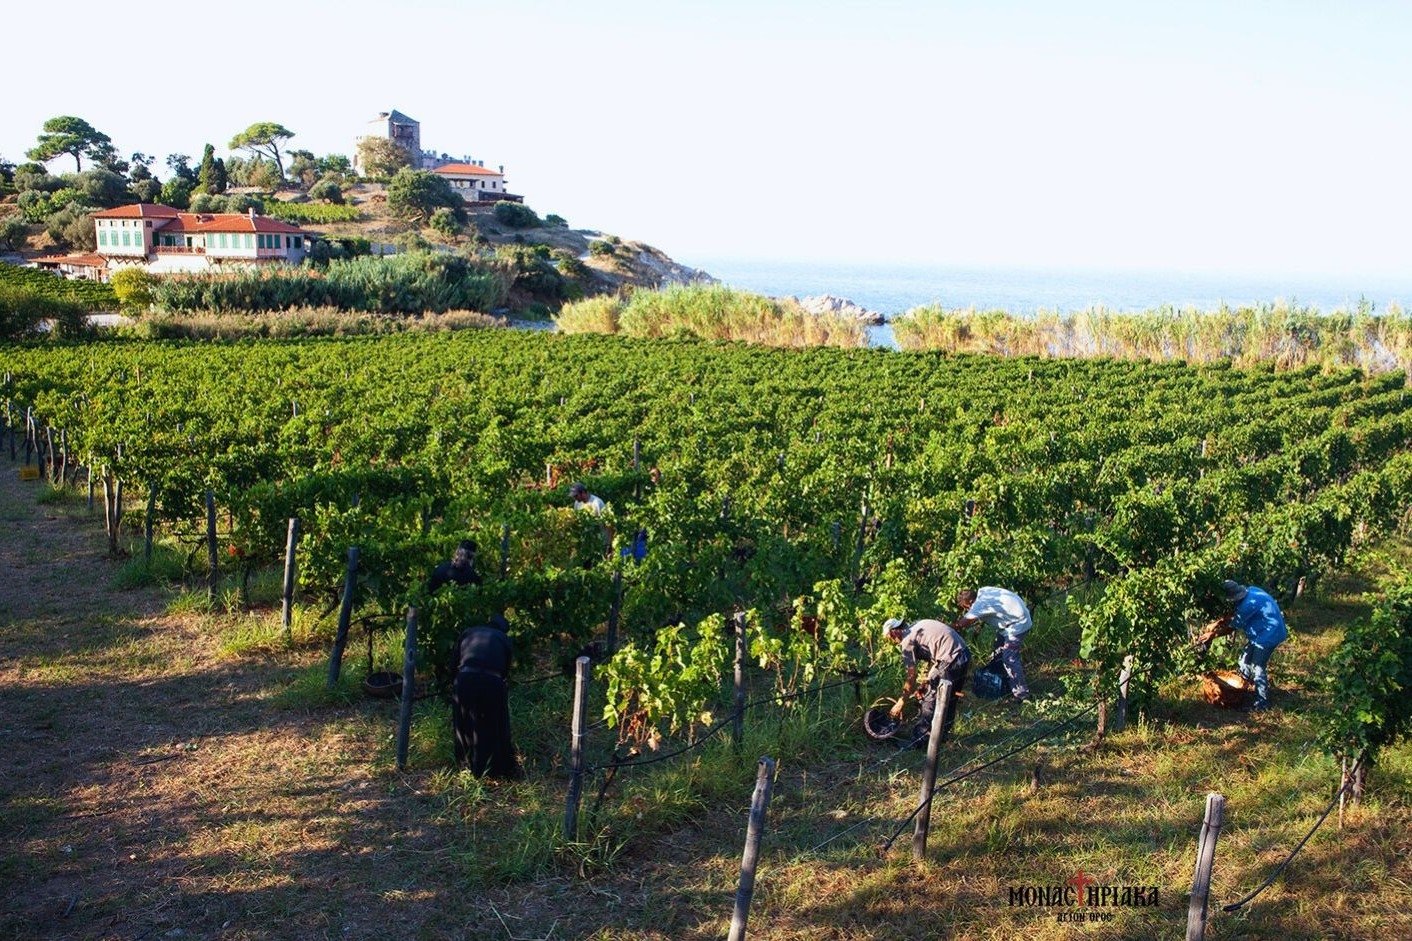 Monks and workers cultivate the vines at Mylopotamos on Mount Athos